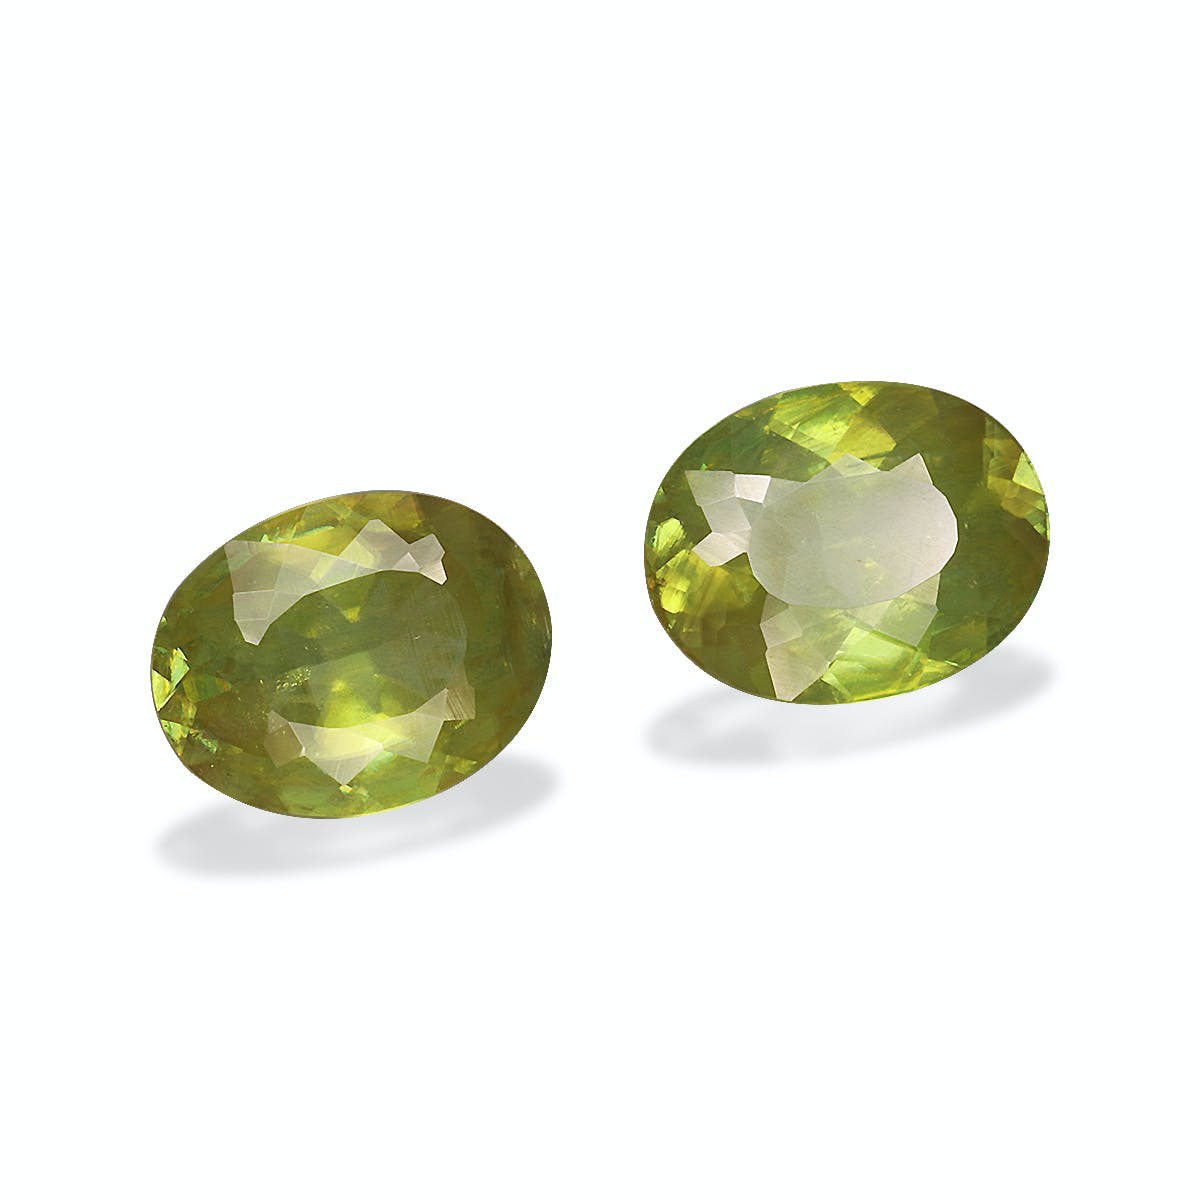 Picture of Lime Green Sphene 3.27ct - 9x7mm Pair (SH0701)